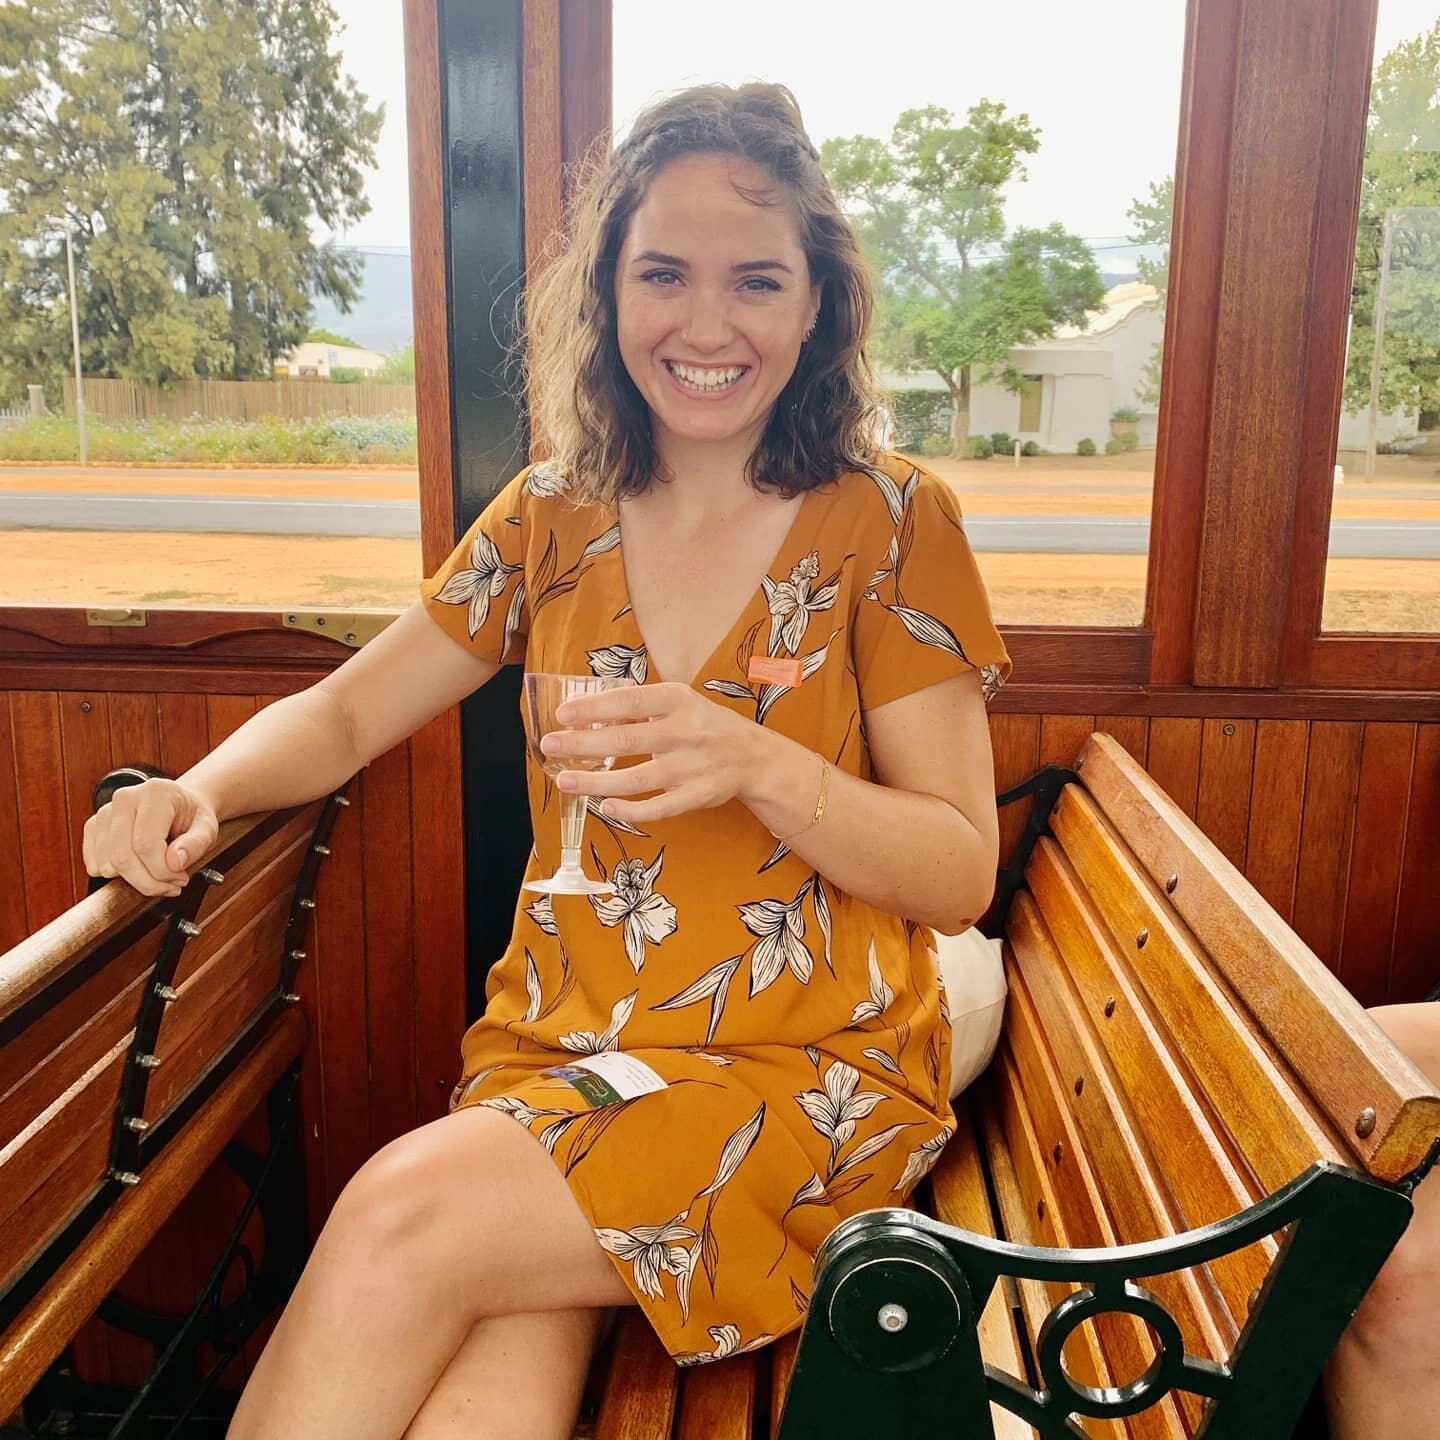 Meet Amy Kristensen, one of our new EM interns! Originally born in the U.K., Amy moved to the U.S. at a young age. Her life became a series of adventures after that, ranging from living in Australia to volunteering in Nepal and Guatemala. After colle